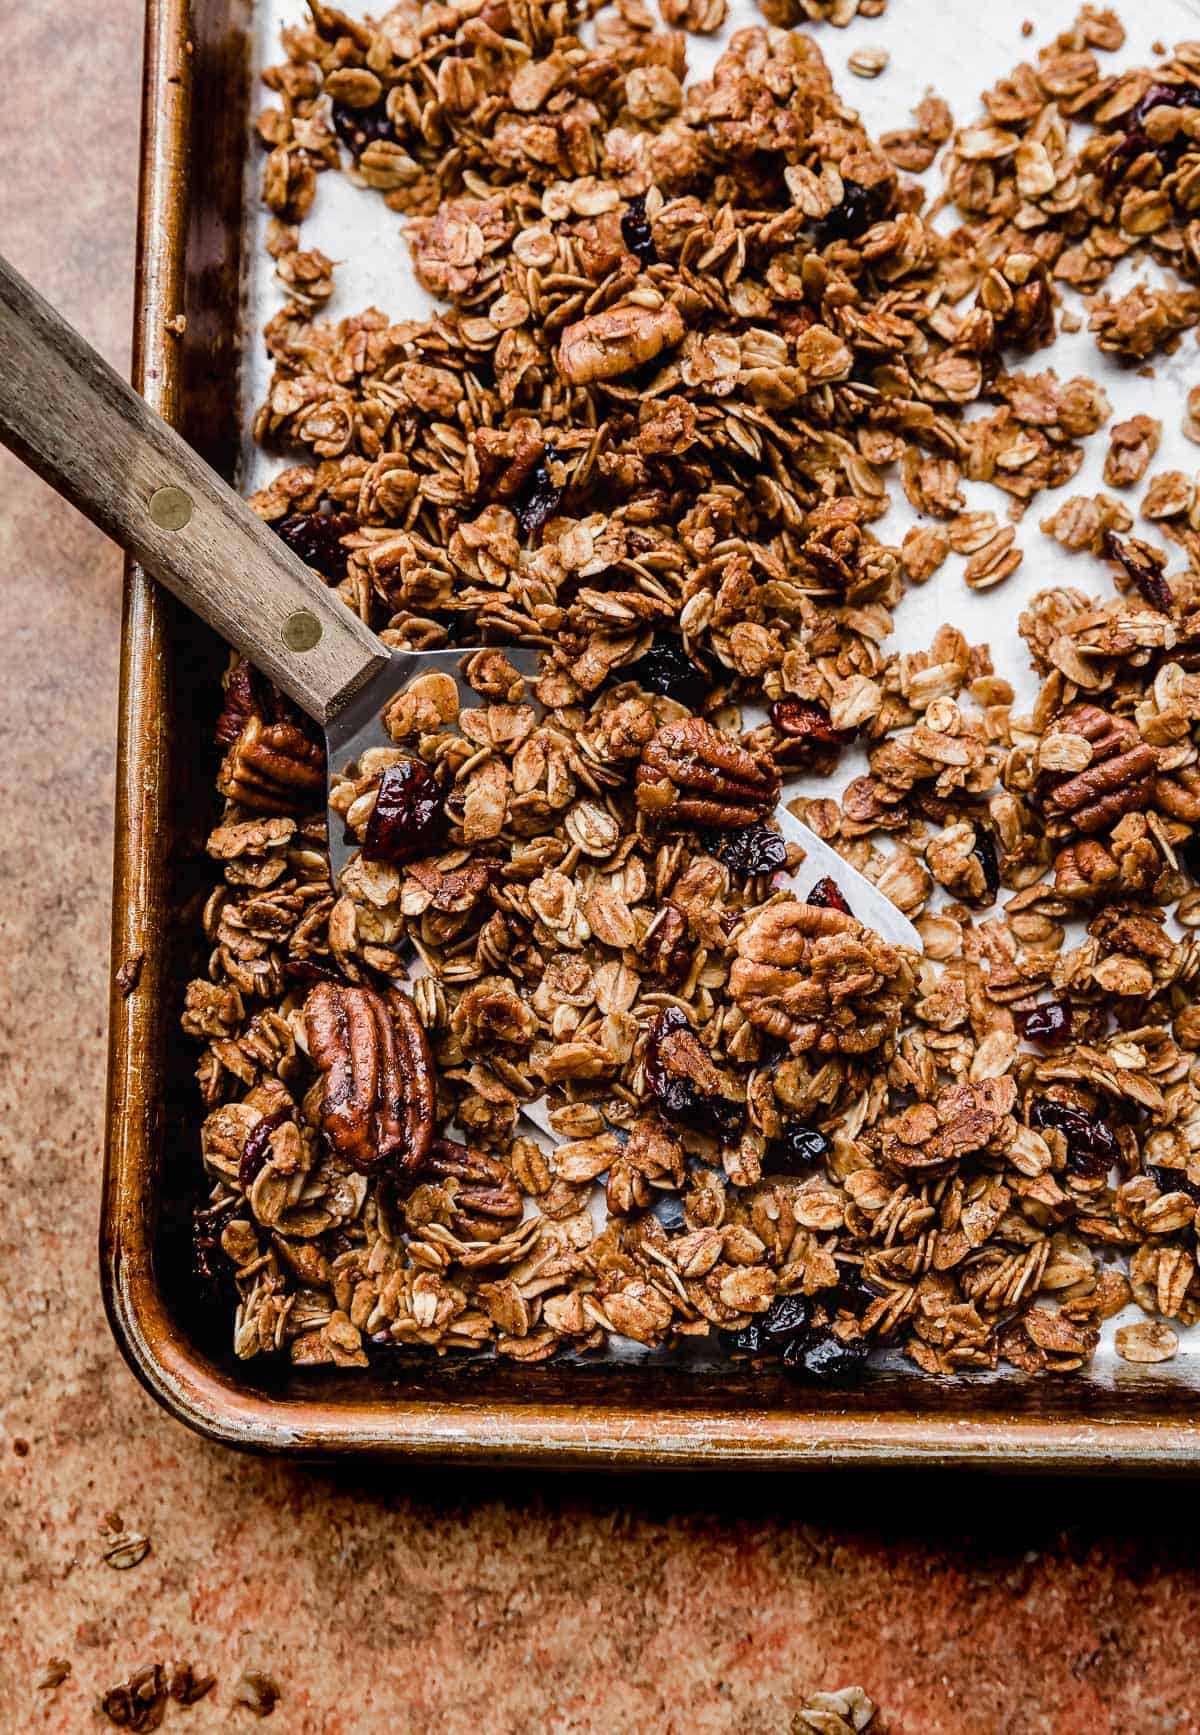 A metal spatula scooping up a deep amber colored gingerbread granola from a baking sheet.